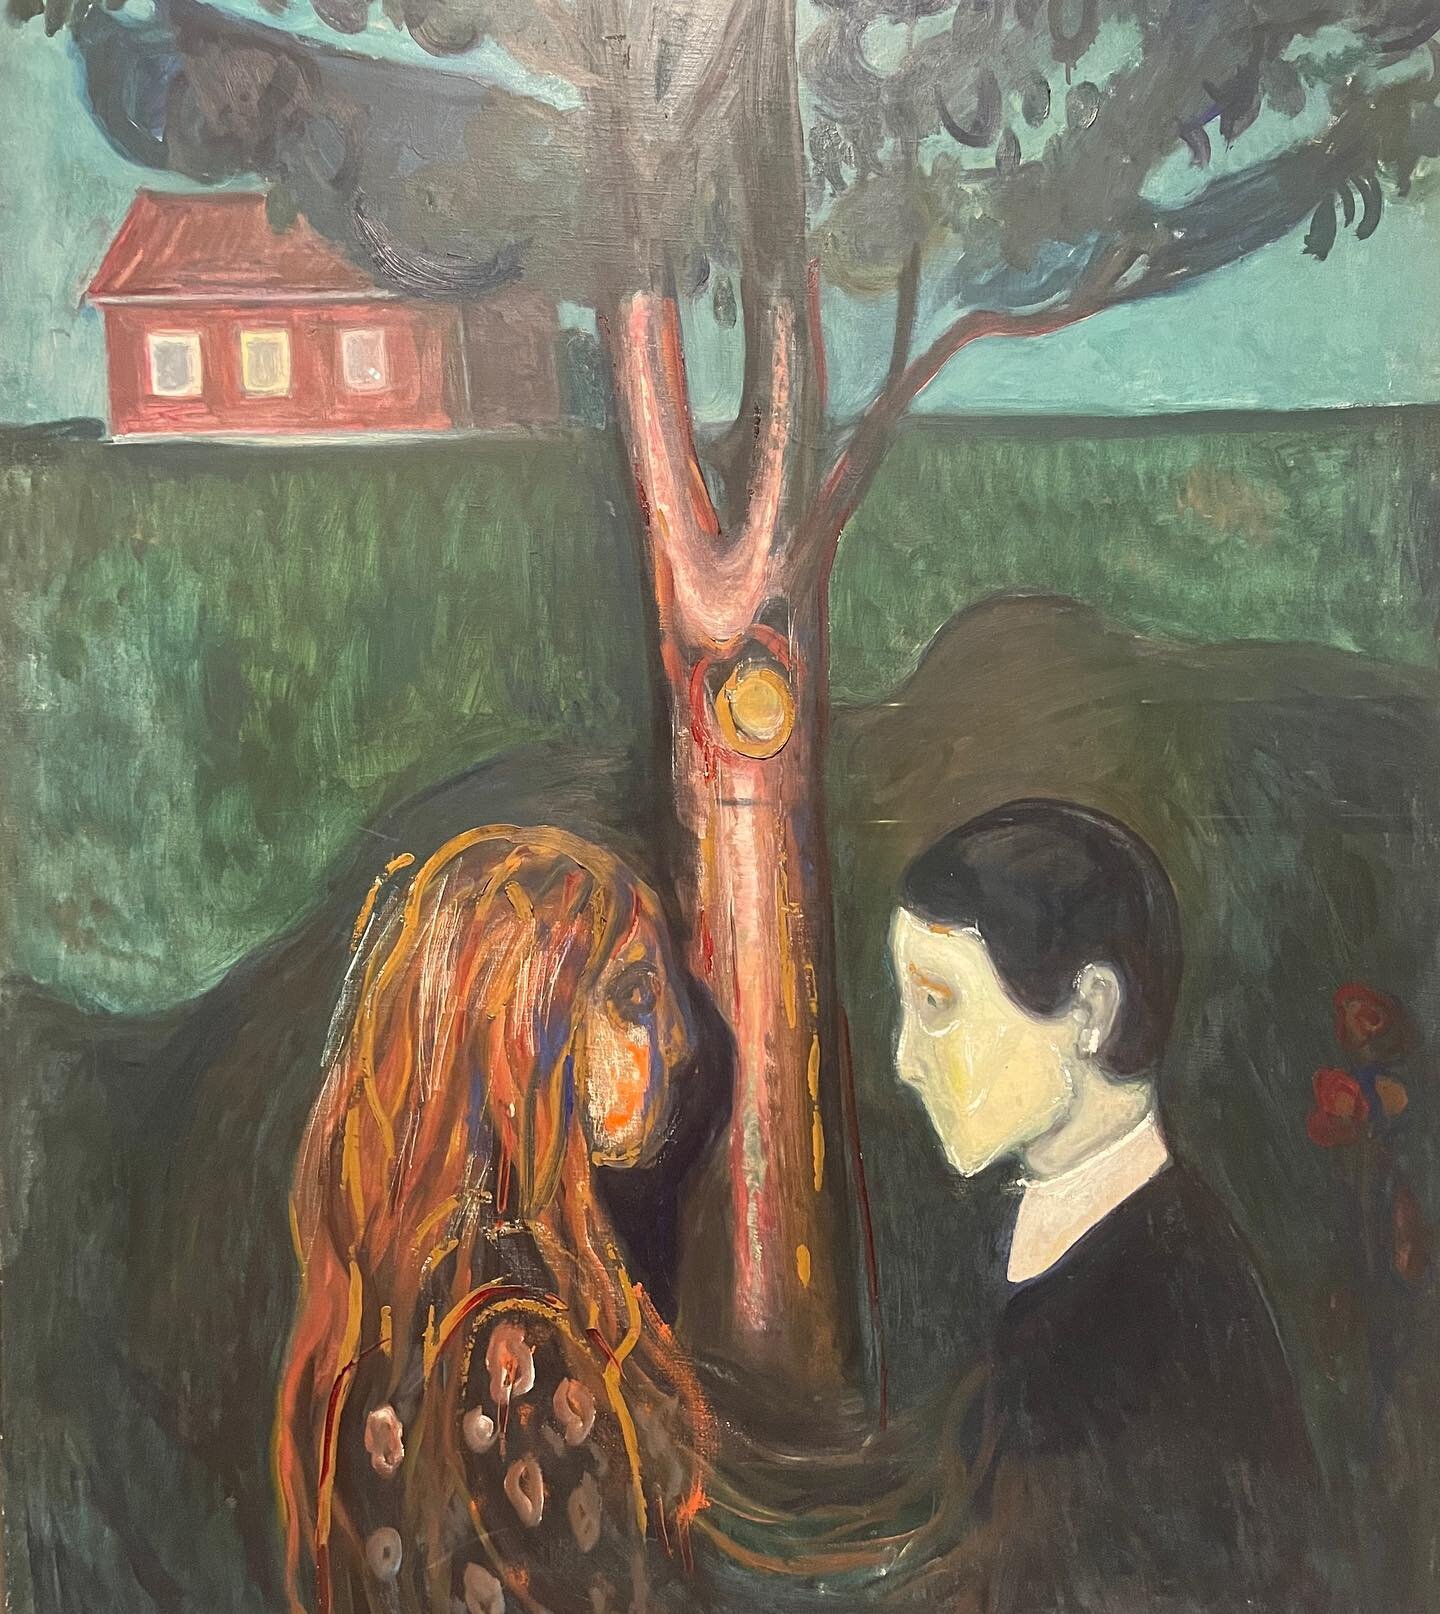 Edvard Munch returned to Berlin for an exhibition at the Berlinische Galerie.
That's when I learned that he had lived here for some time, and that after some excesses he had decided to move back to Norway.. Seems to be a Berlin tradition.. :)

#allyo